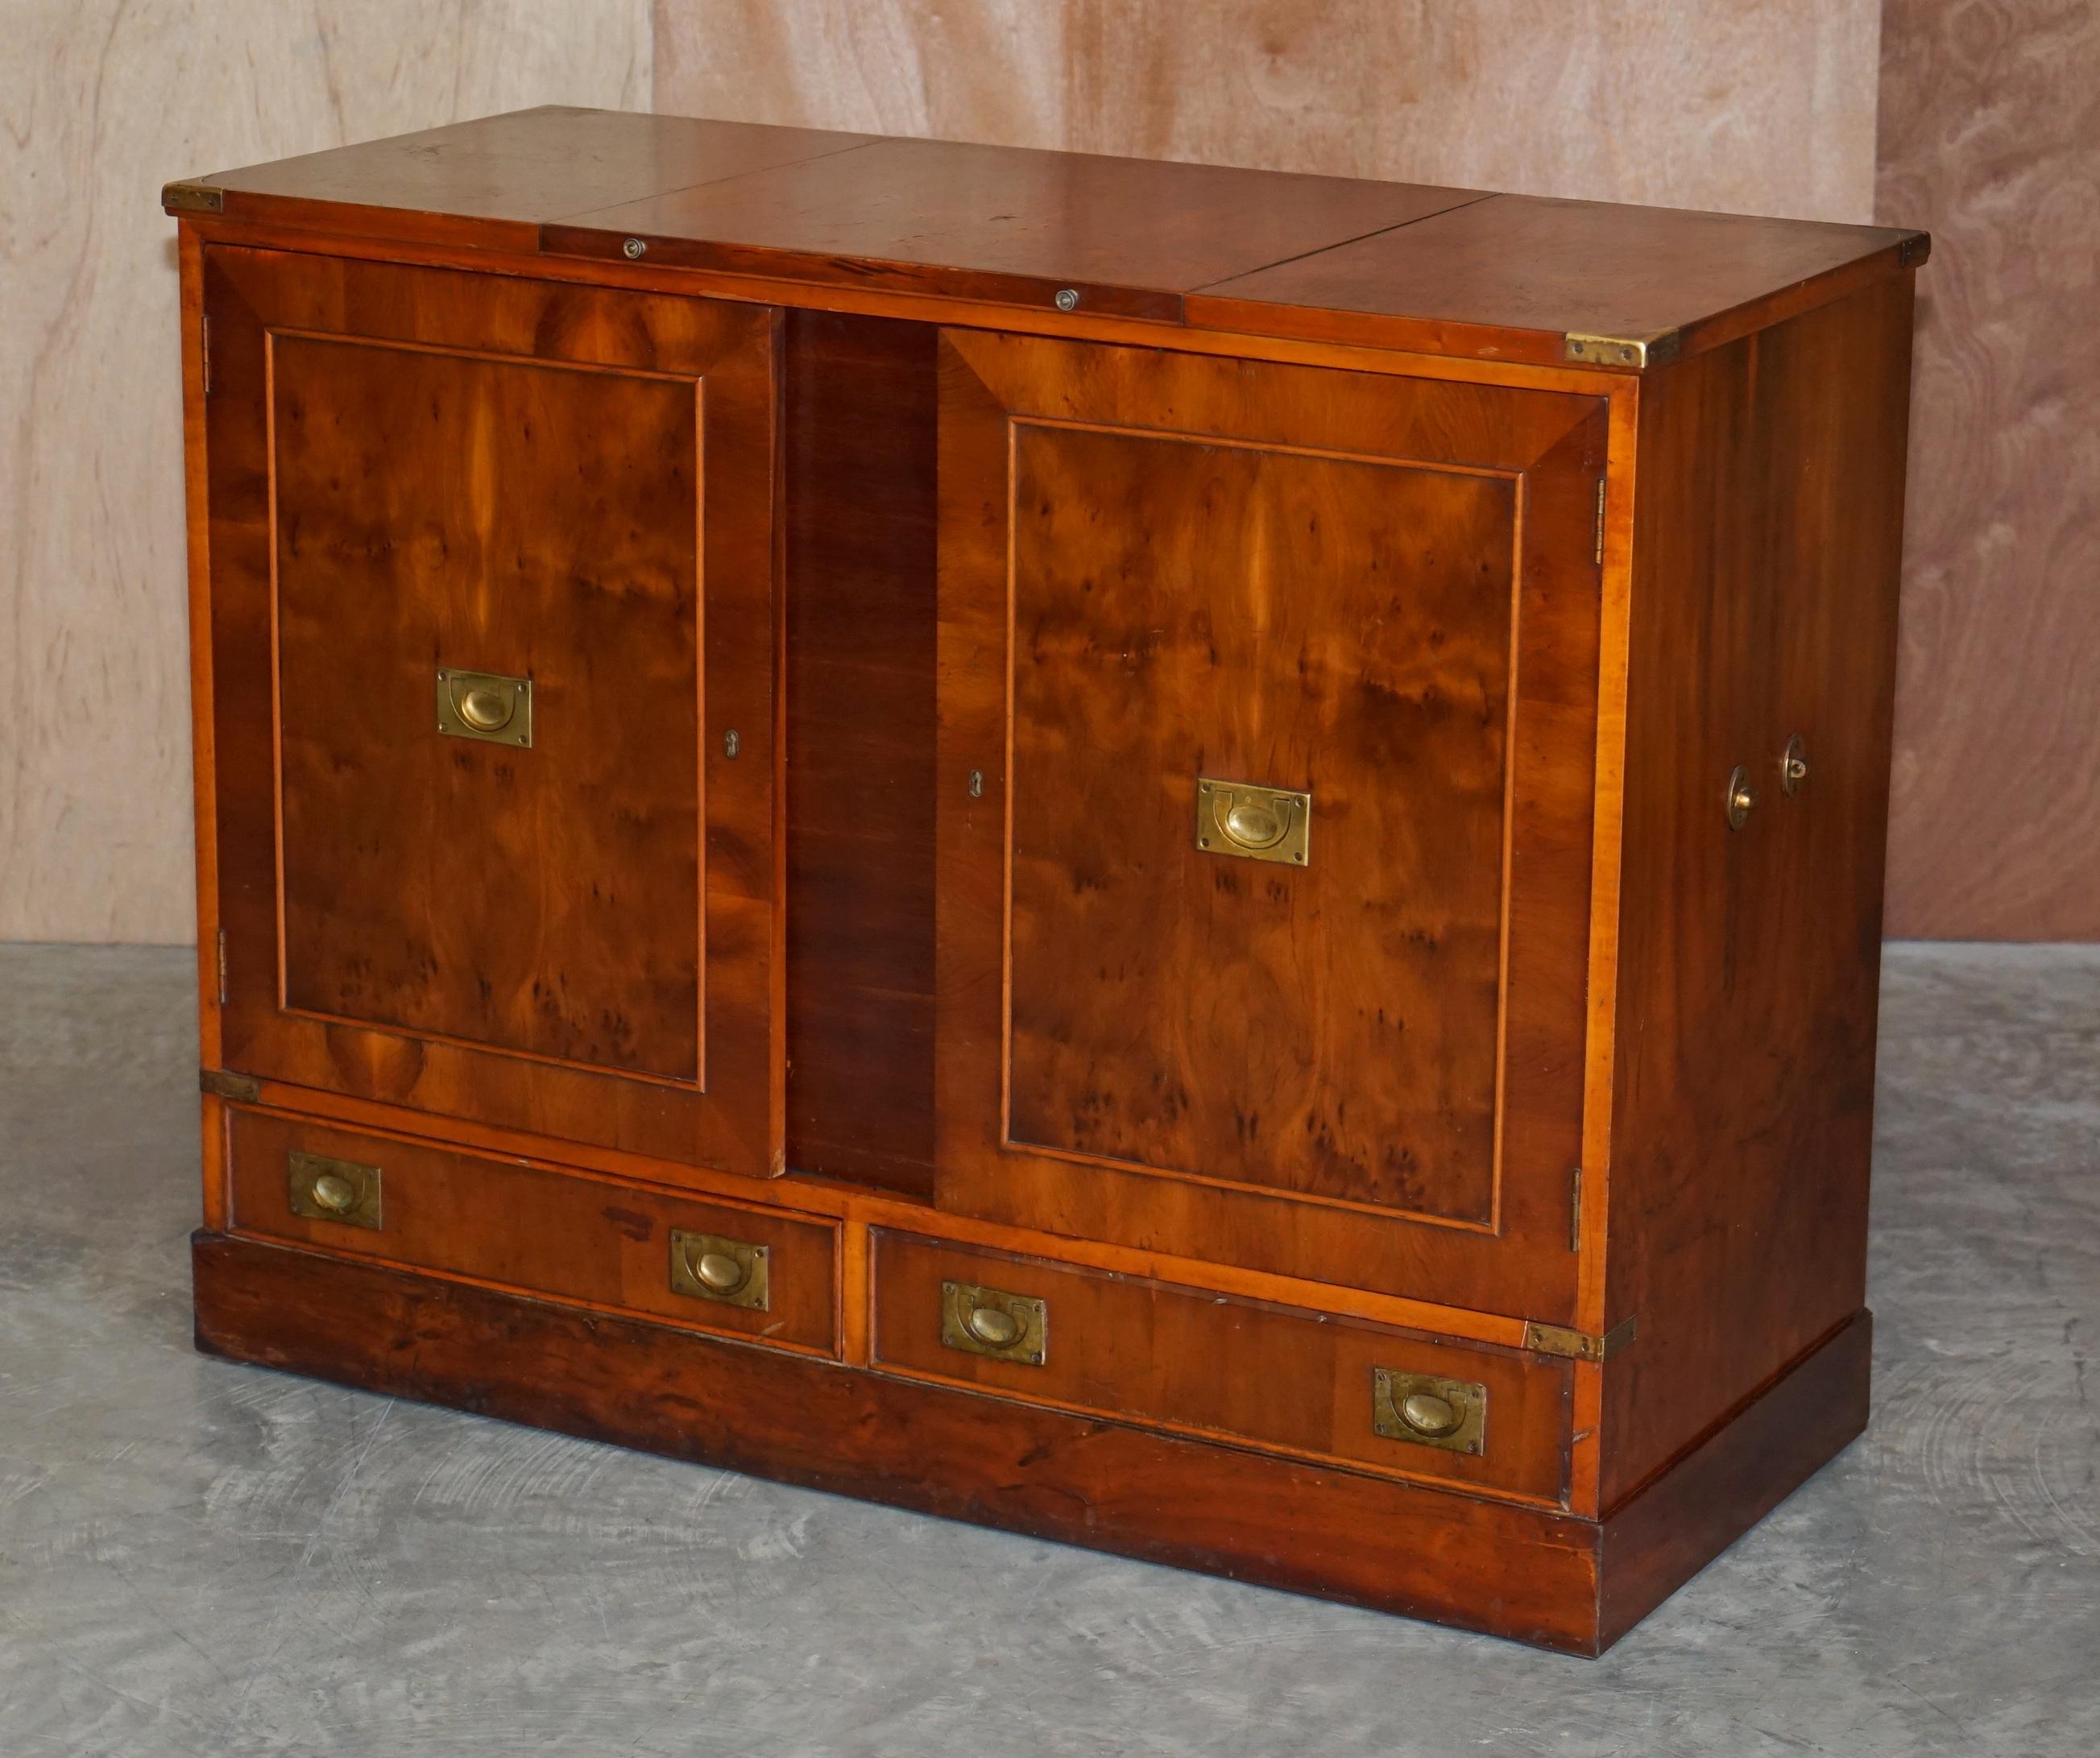 Hand-Crafted Rare Burr Yew Wood Military Campaign Gentleman's Dressing Table Chest of Drawers For Sale